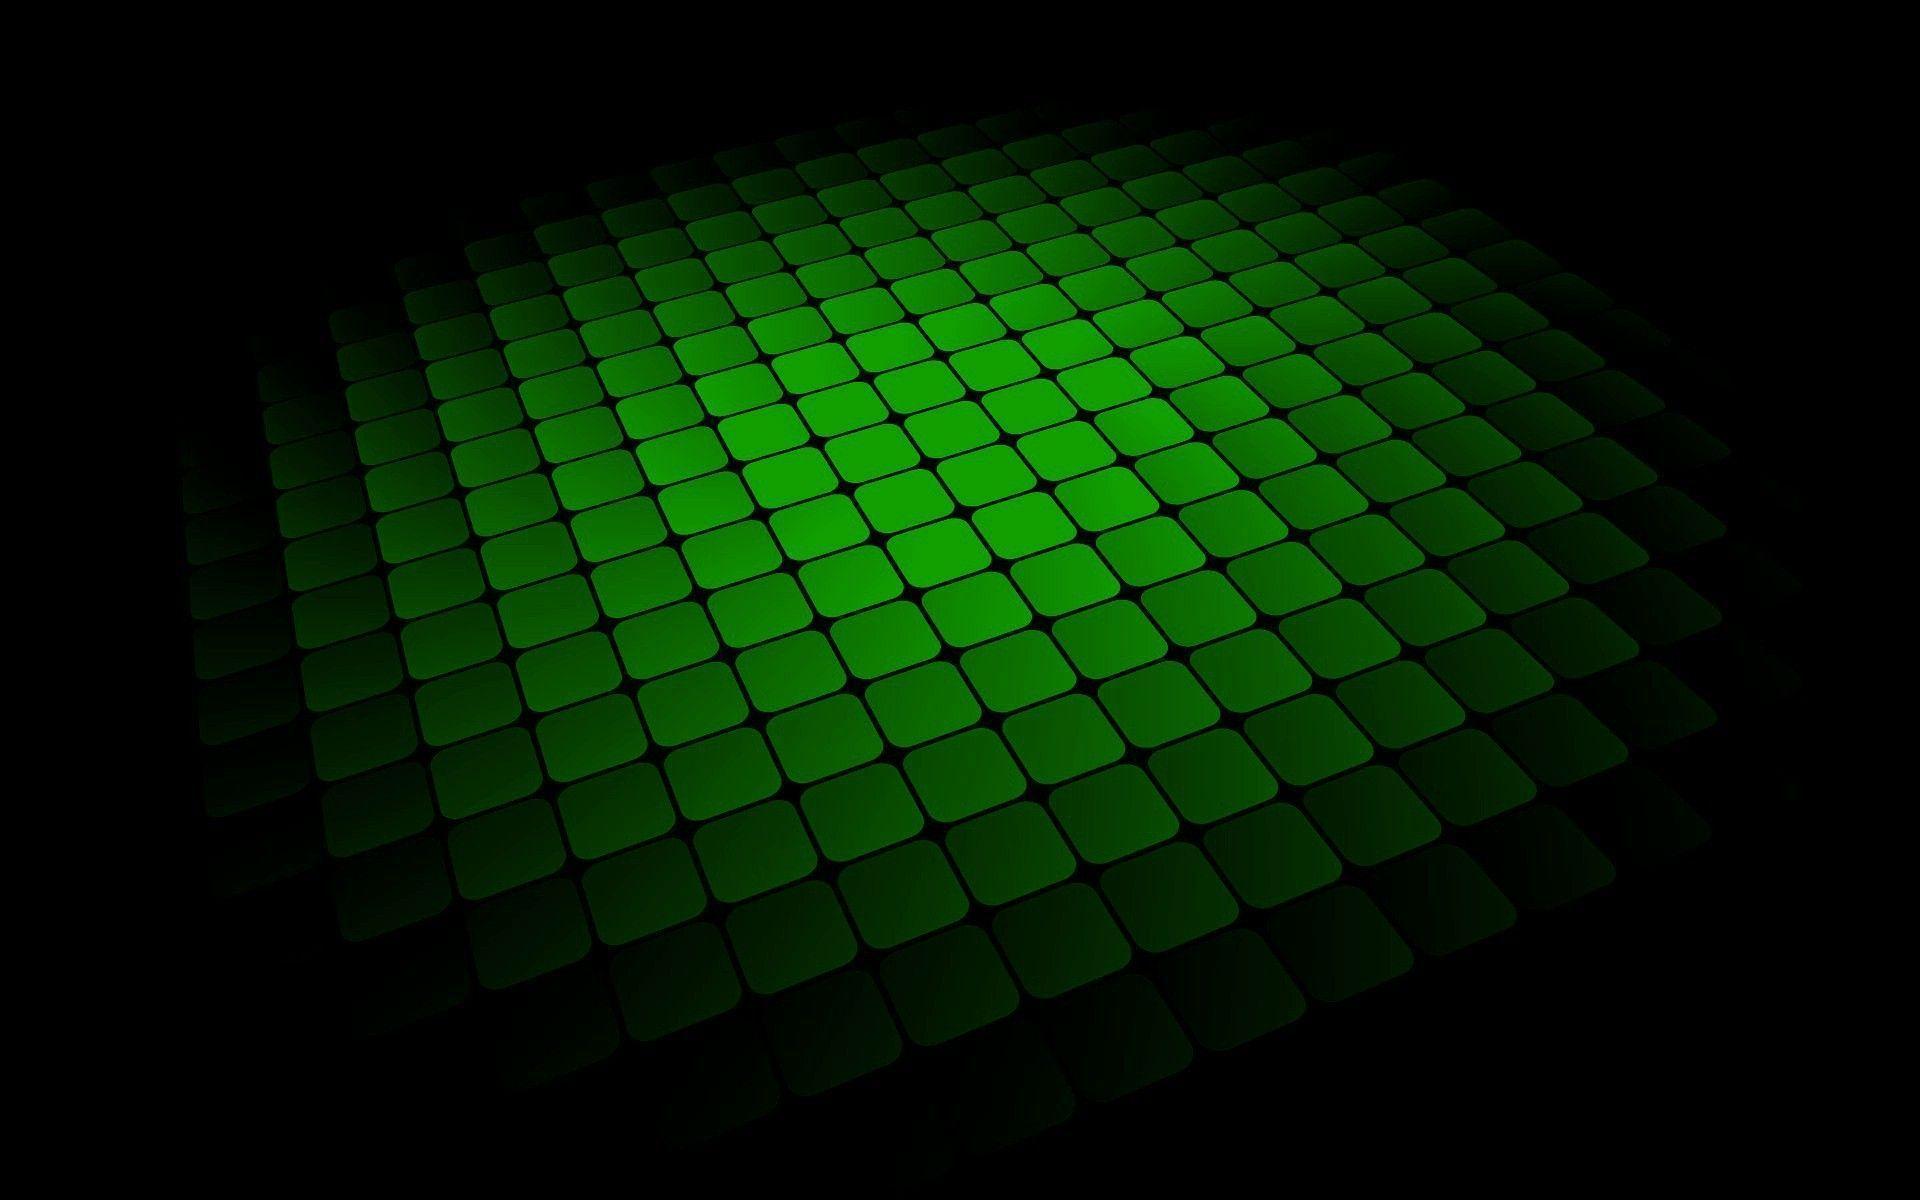 Black And Green Abstract Backgrounds Hd Image 3 HD Wallpapers